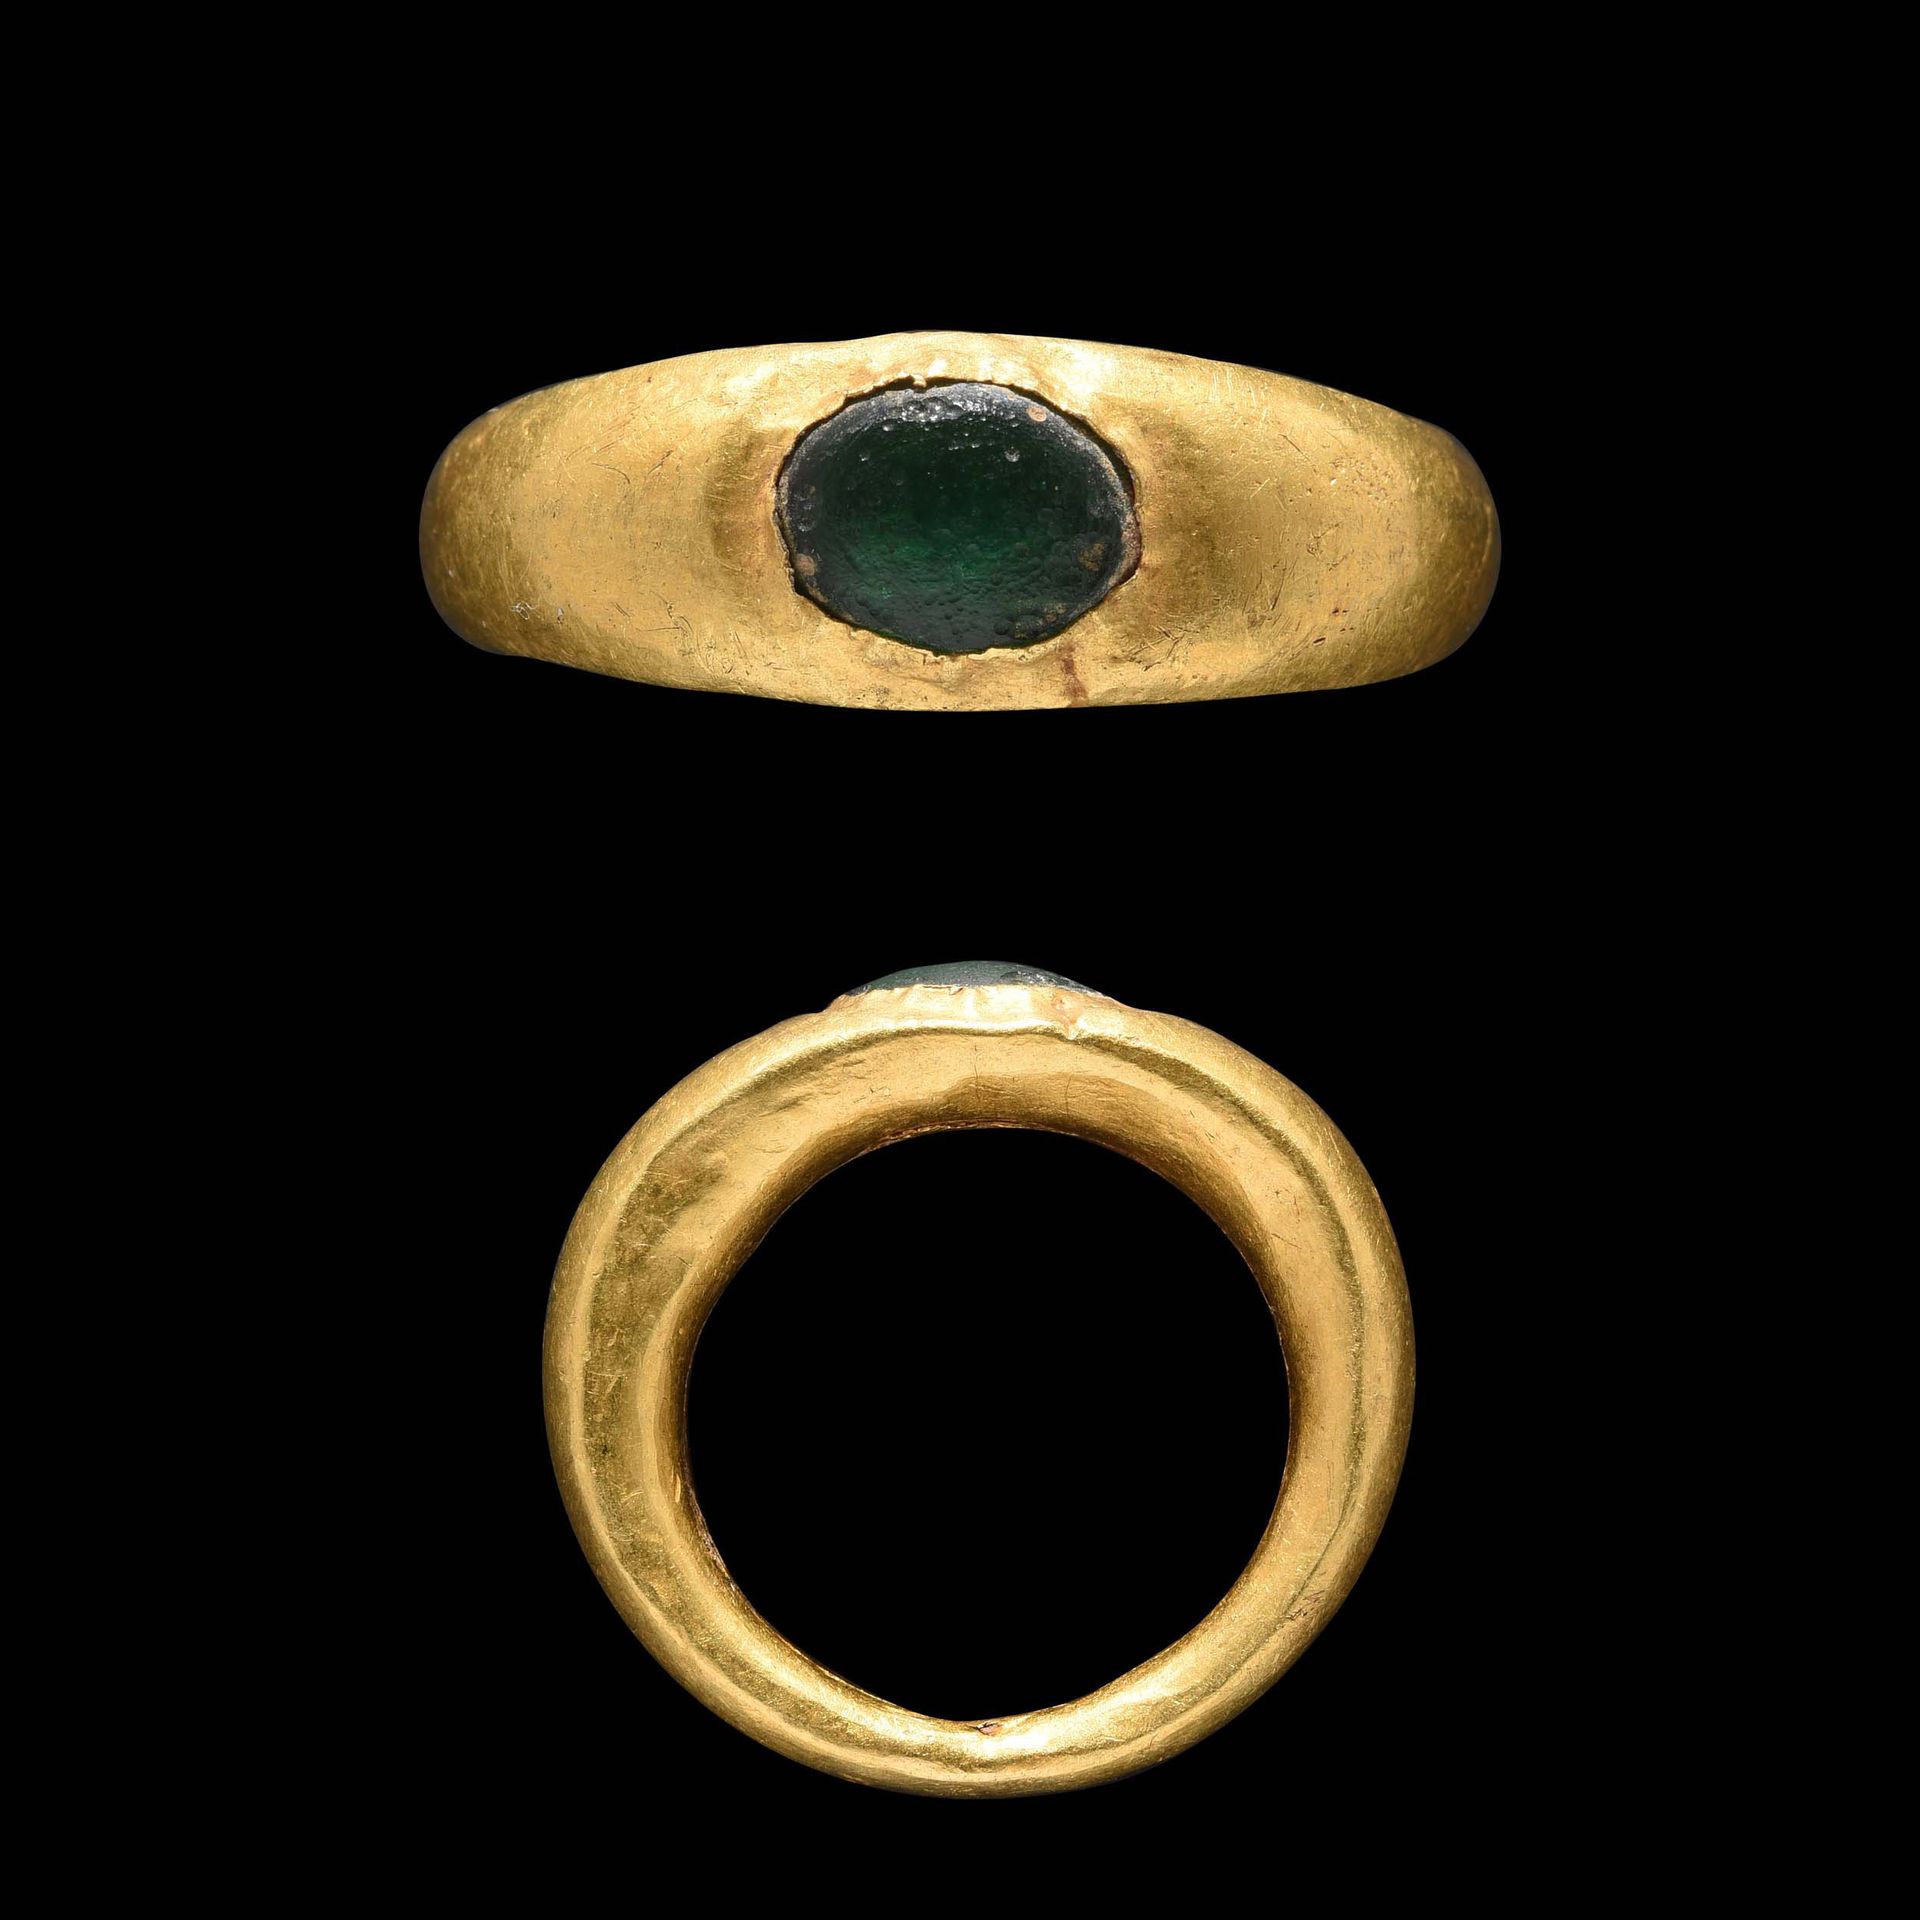 Null RING

Roman art, 1st - 2nd century.

Gold, set with a green glass bead.



&hellip;